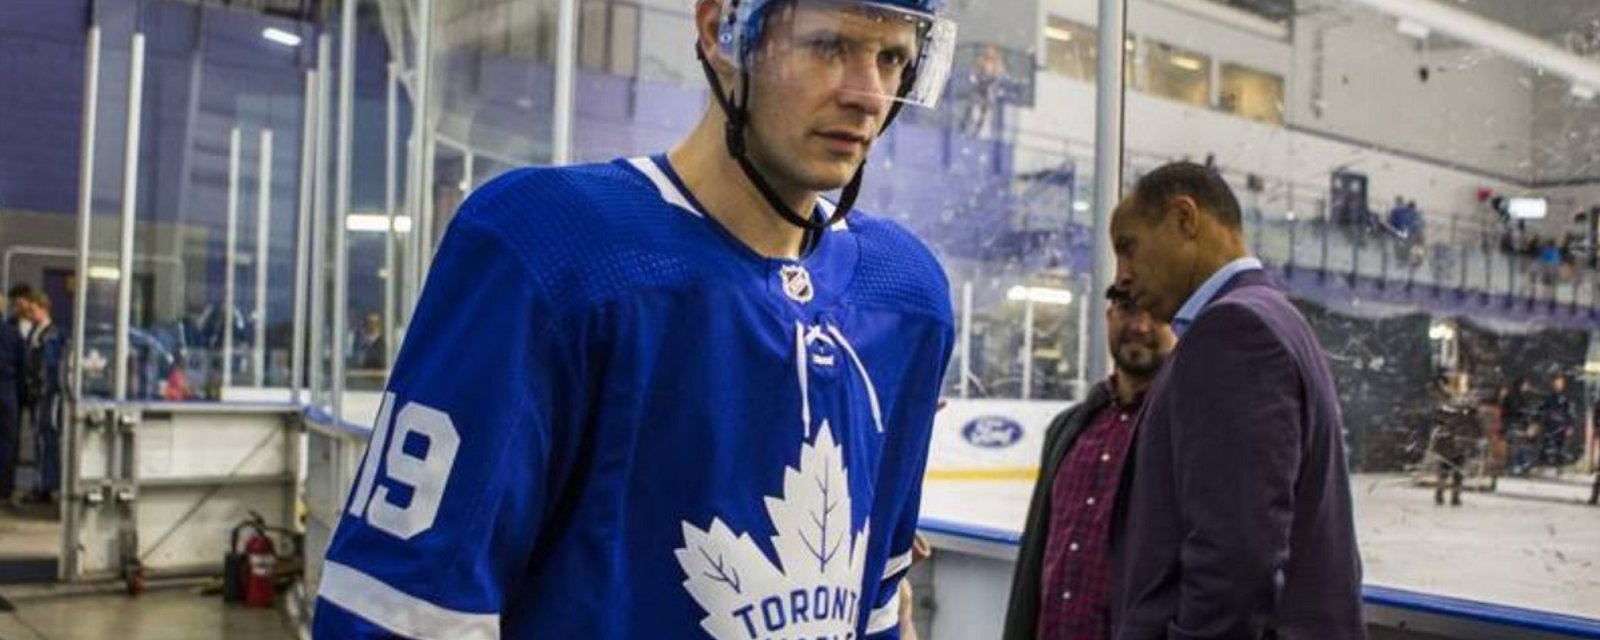 Rumor: The real reason Jason Spezza resigned from the Maple Leafs.